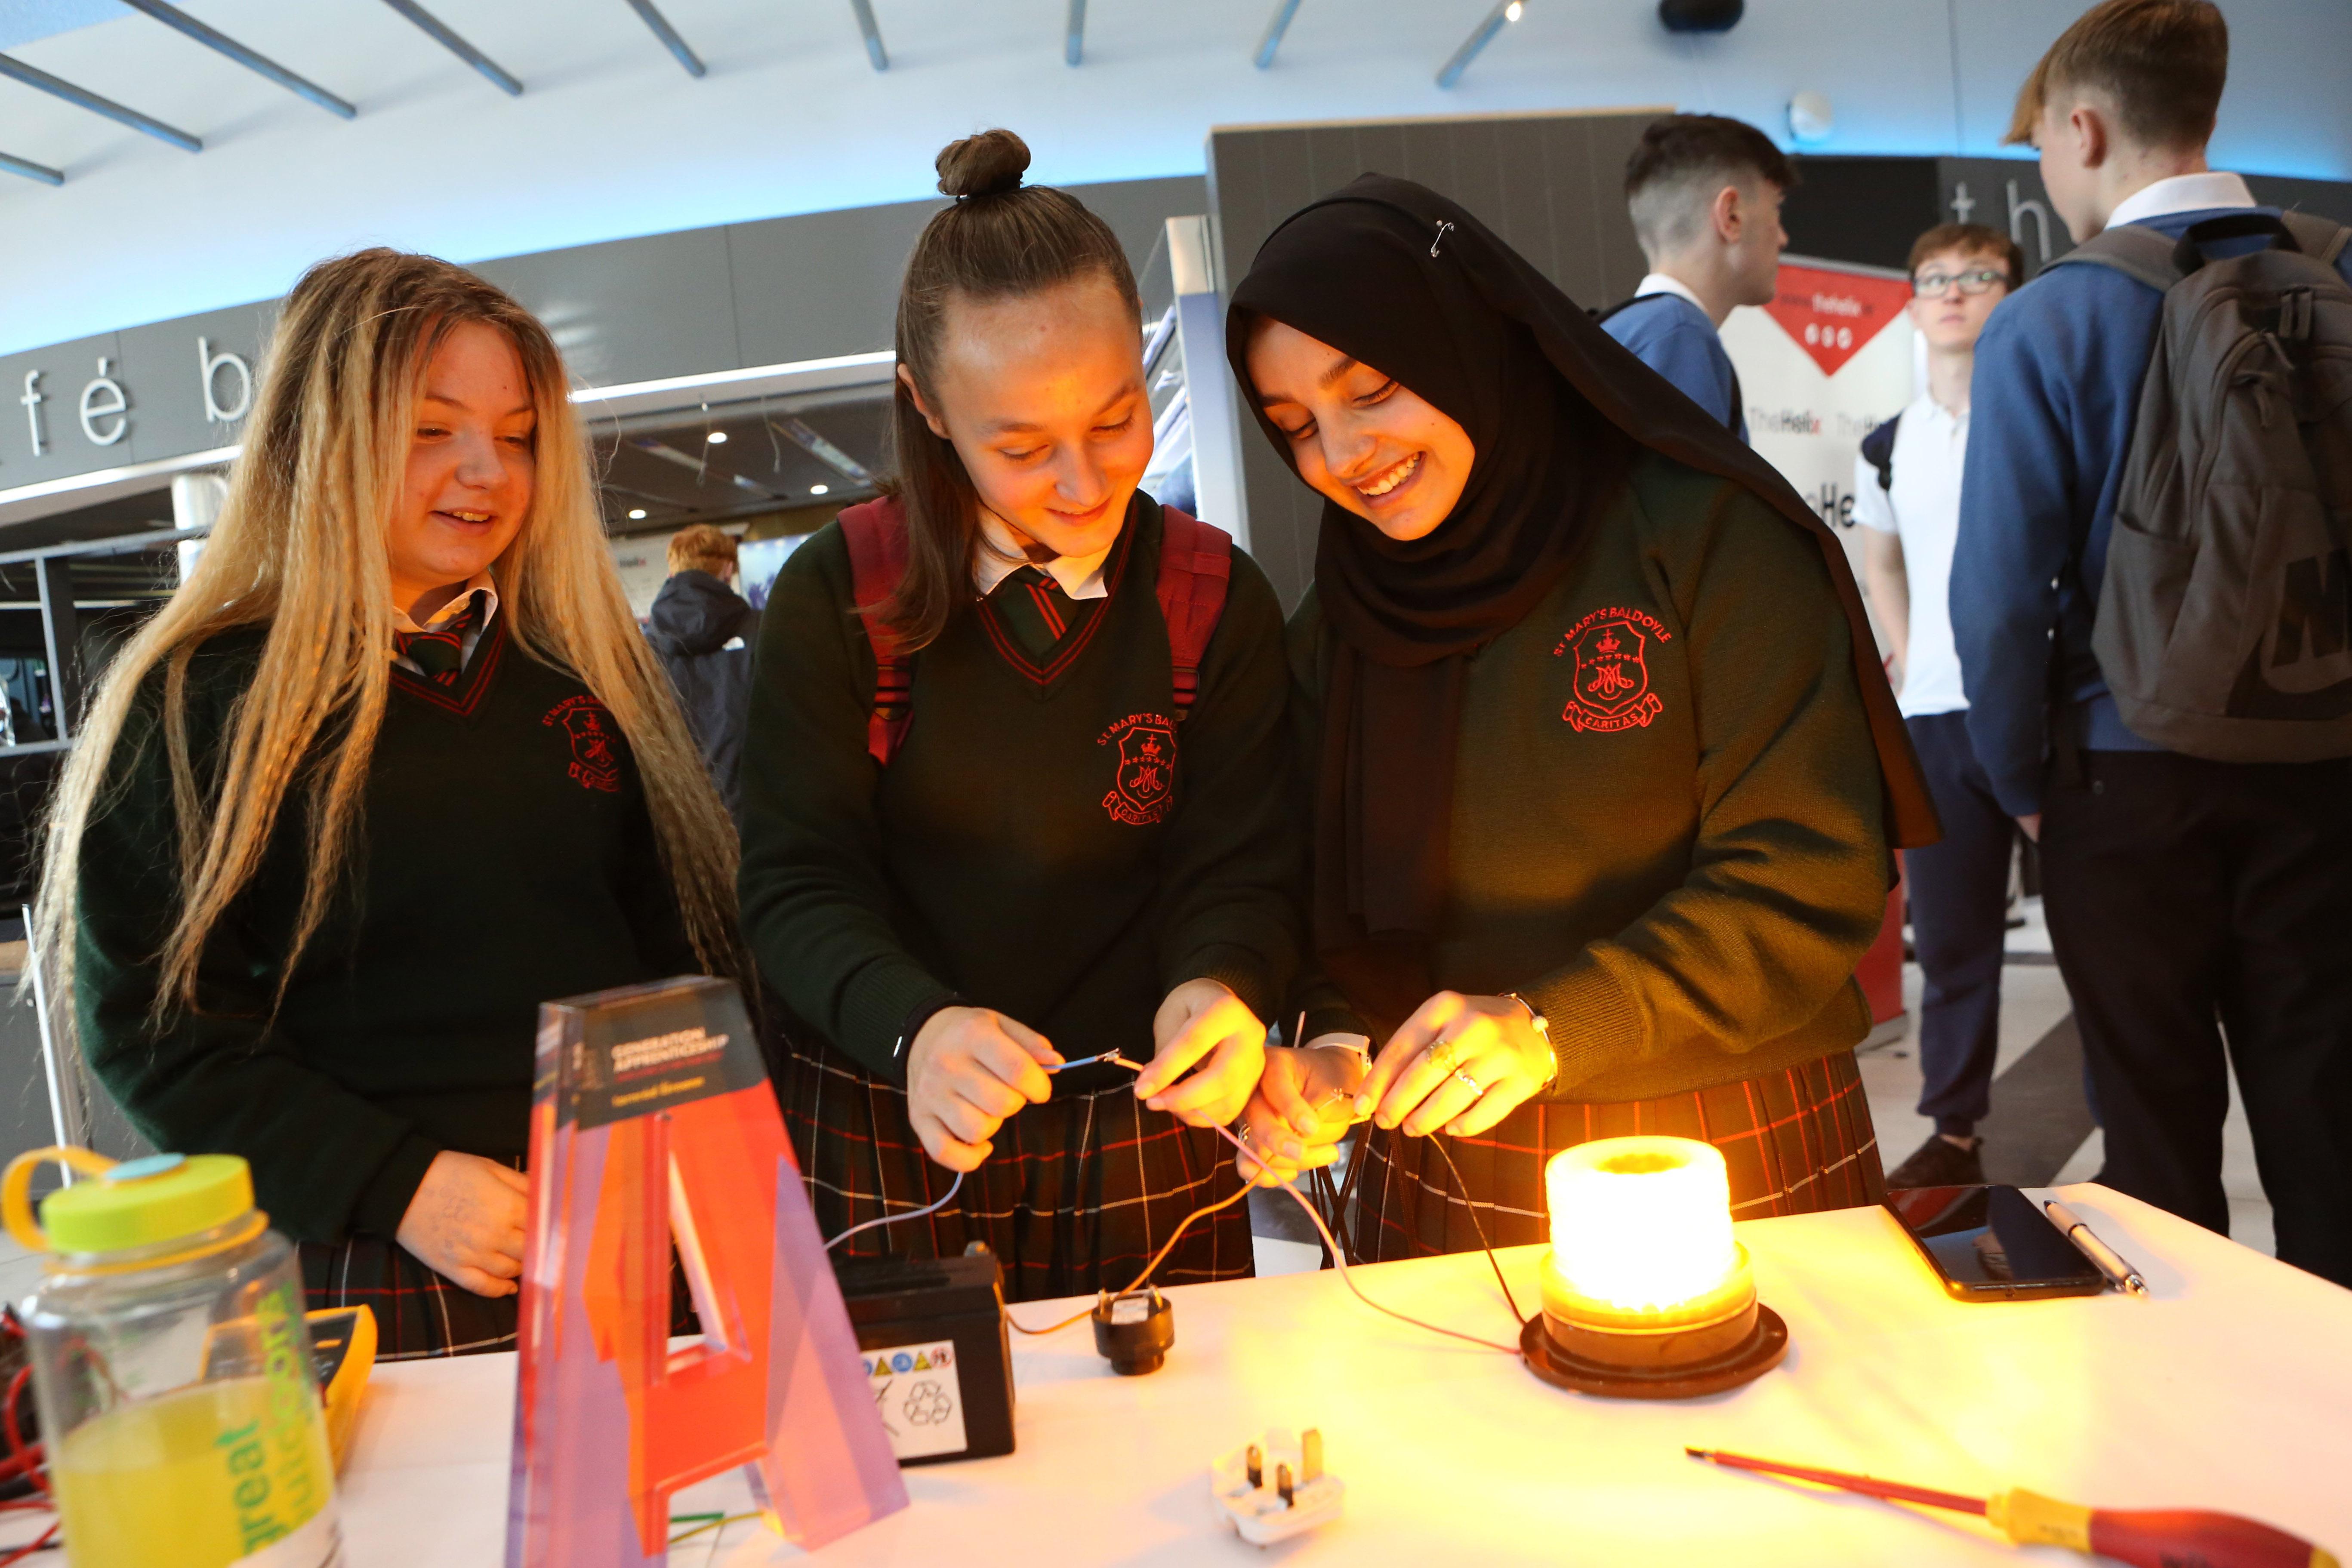 TY students from across Ireland came to discover more on careers and educational futures